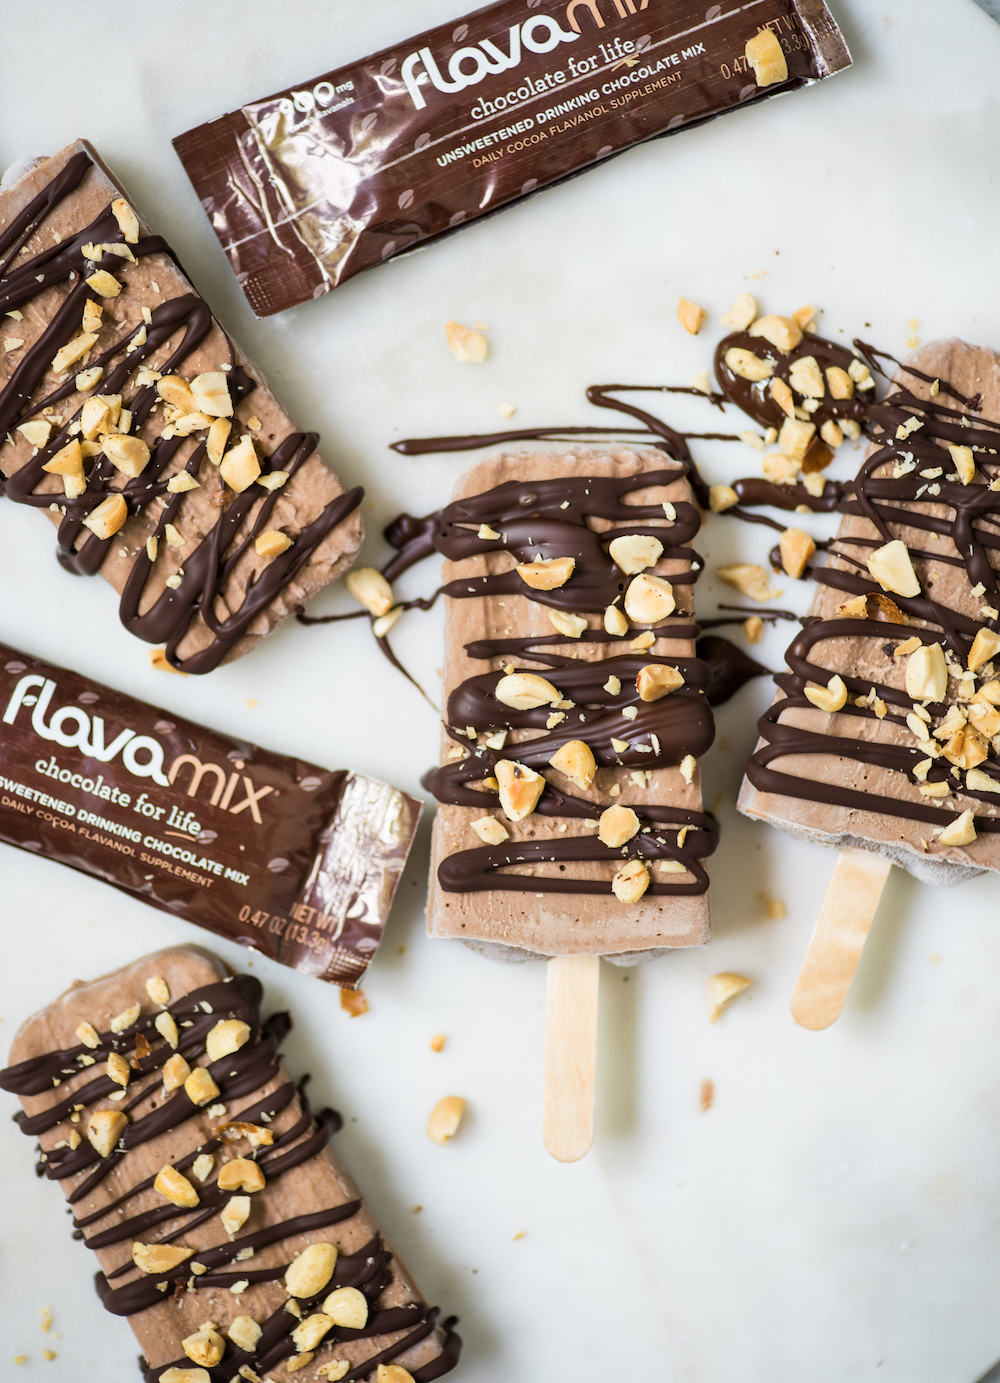 Dark Chocolate Peanut Butter Popsicles with 900mg cocoa flavanols